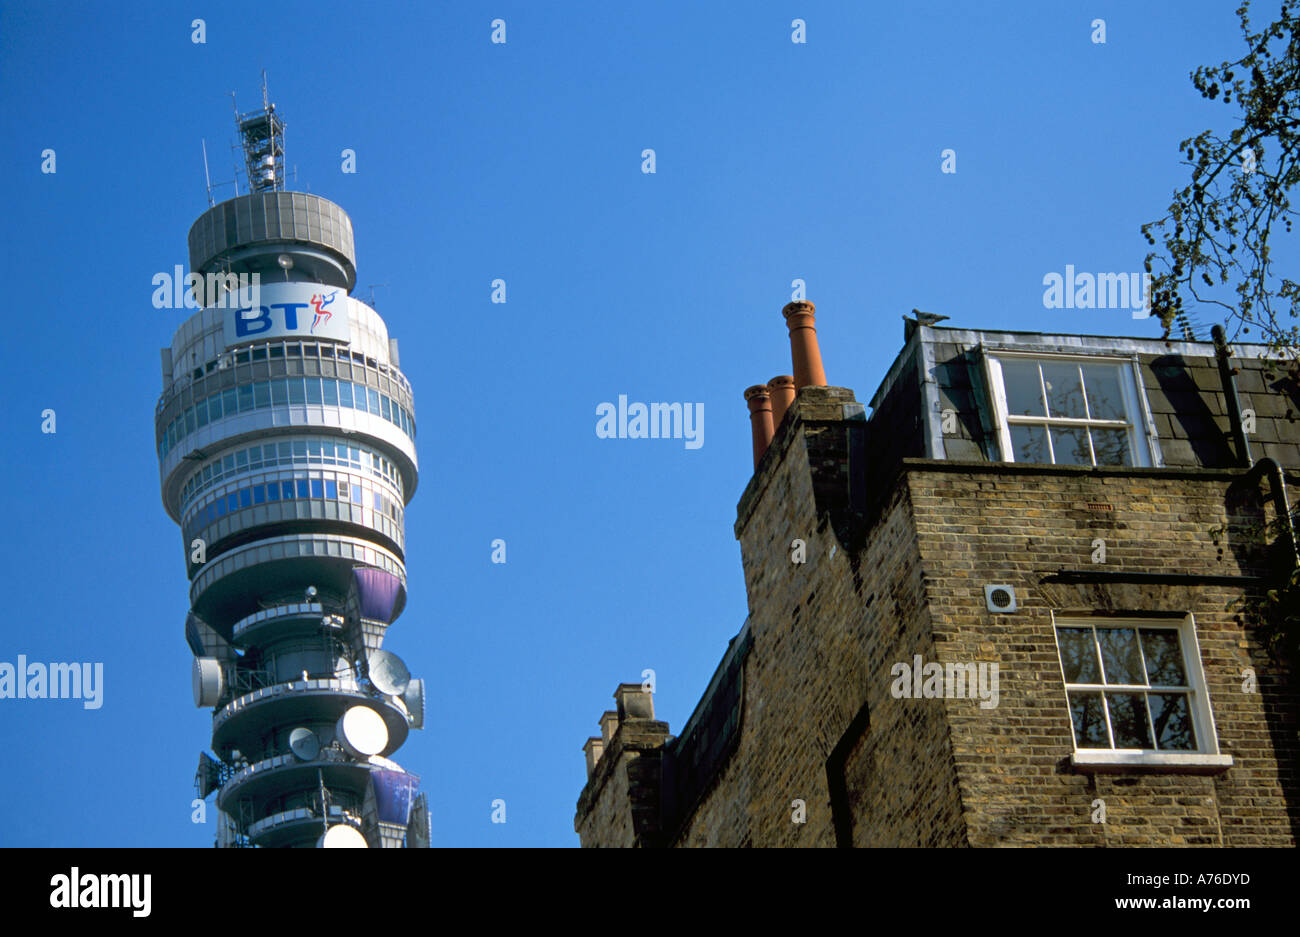 Close up compressed perspective view of the BT Post Office Tower from ground level against a blue sky. Stock Photo